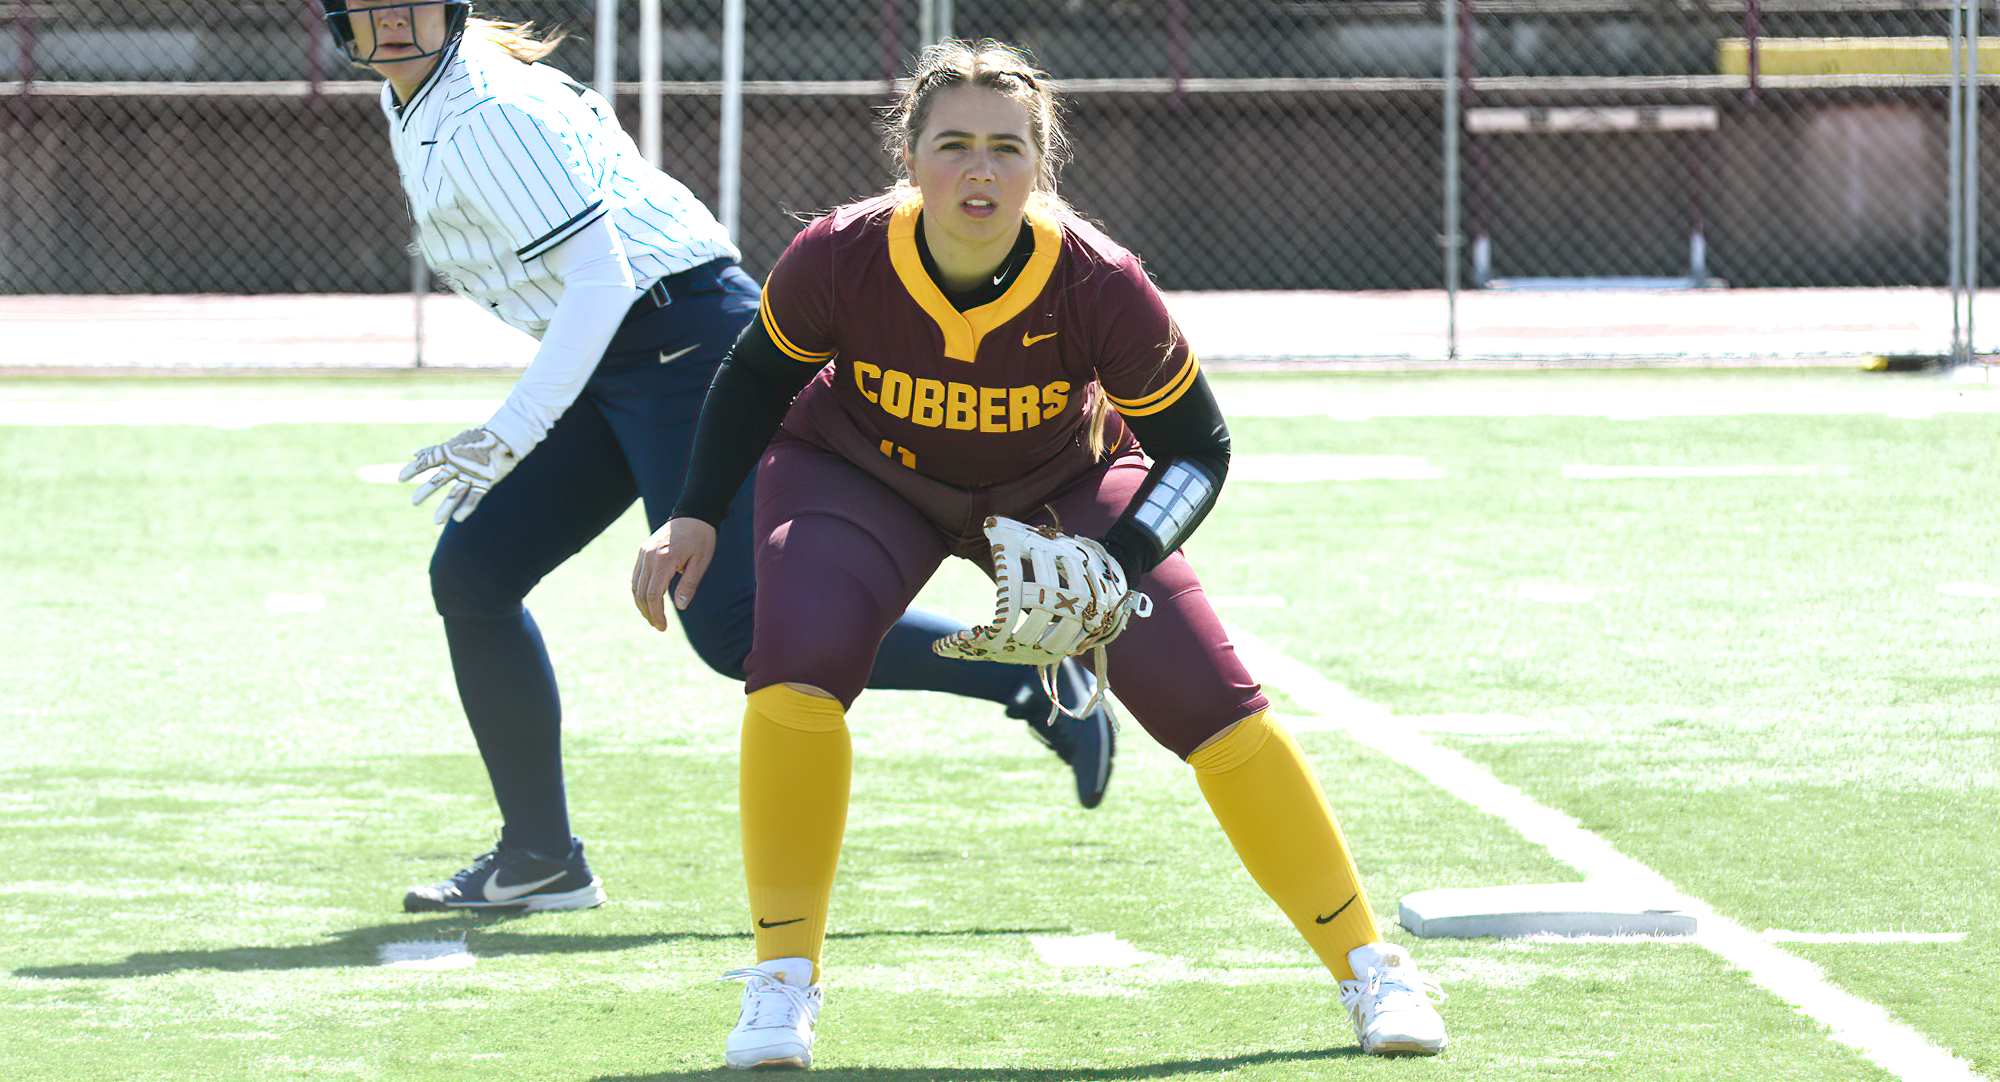 Val Kolstad went 3-for-6 with two RBI in the Cobbers' split with Macalester. She scored CC's only run in Game 1 and drove in two runs in the finale.